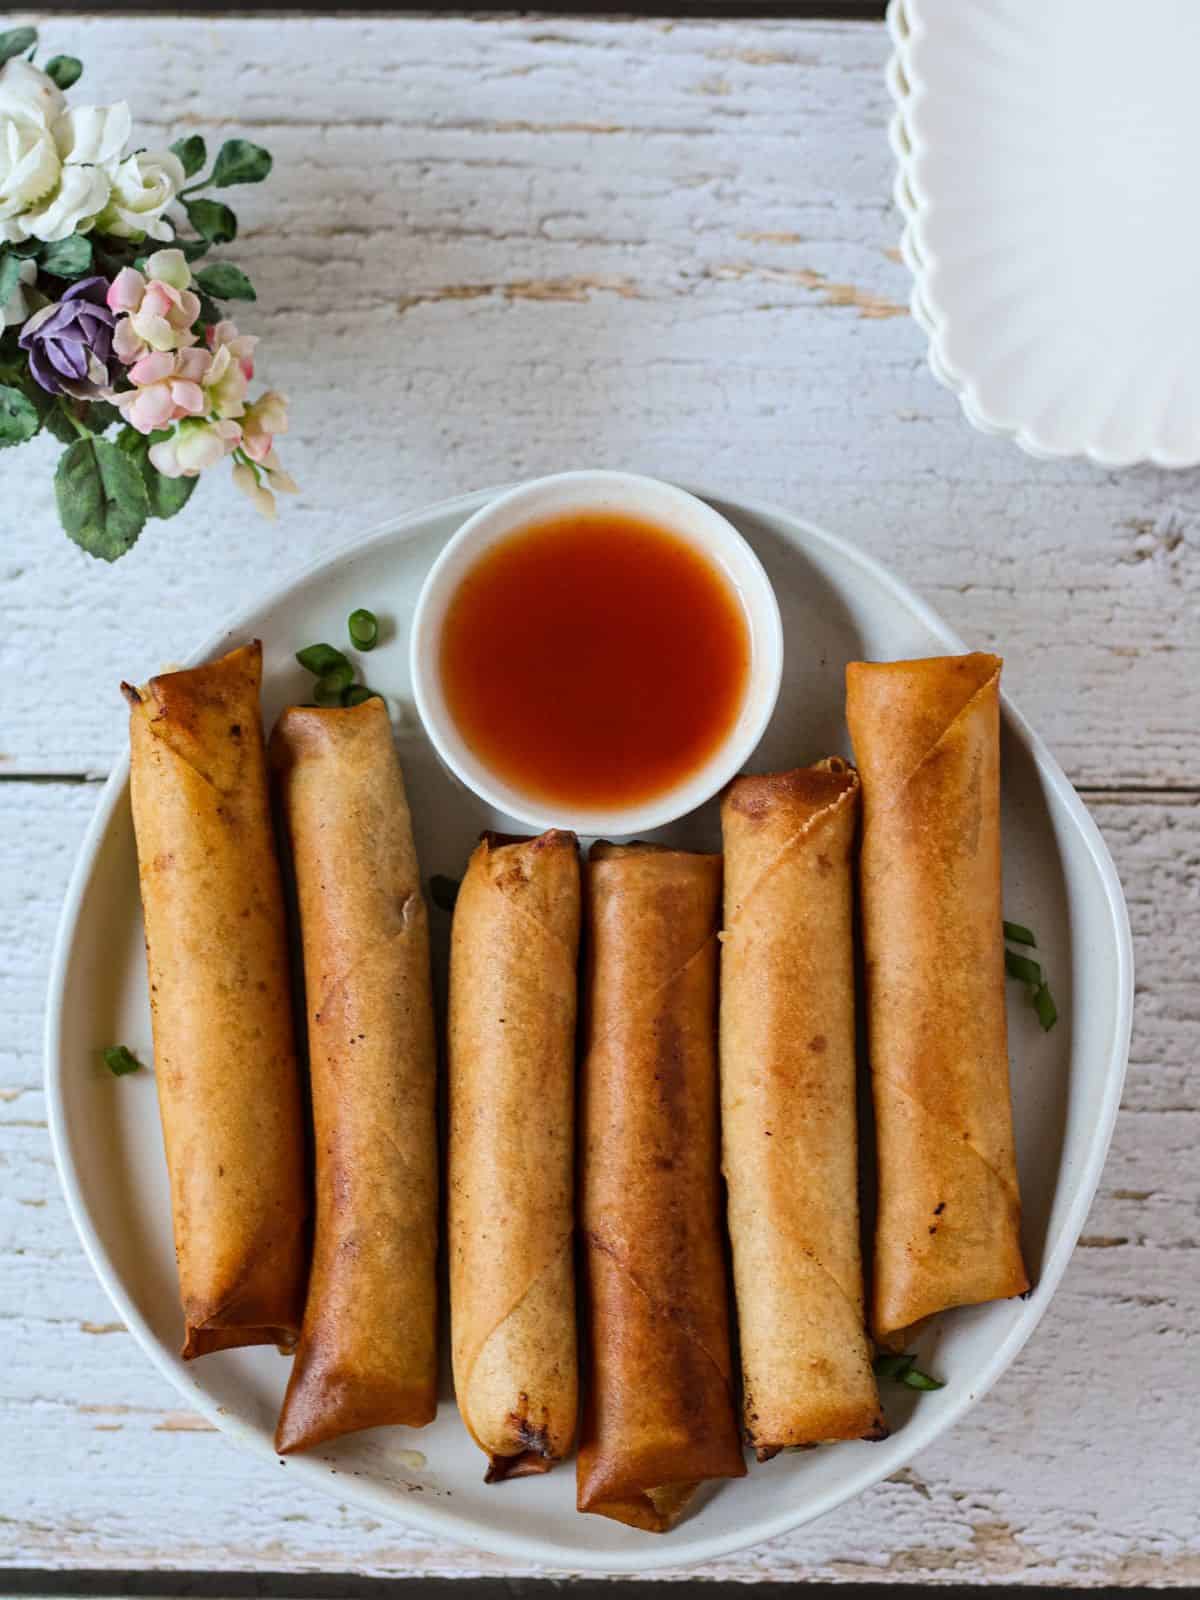 Pork lumpia in a table with dipping sauce.